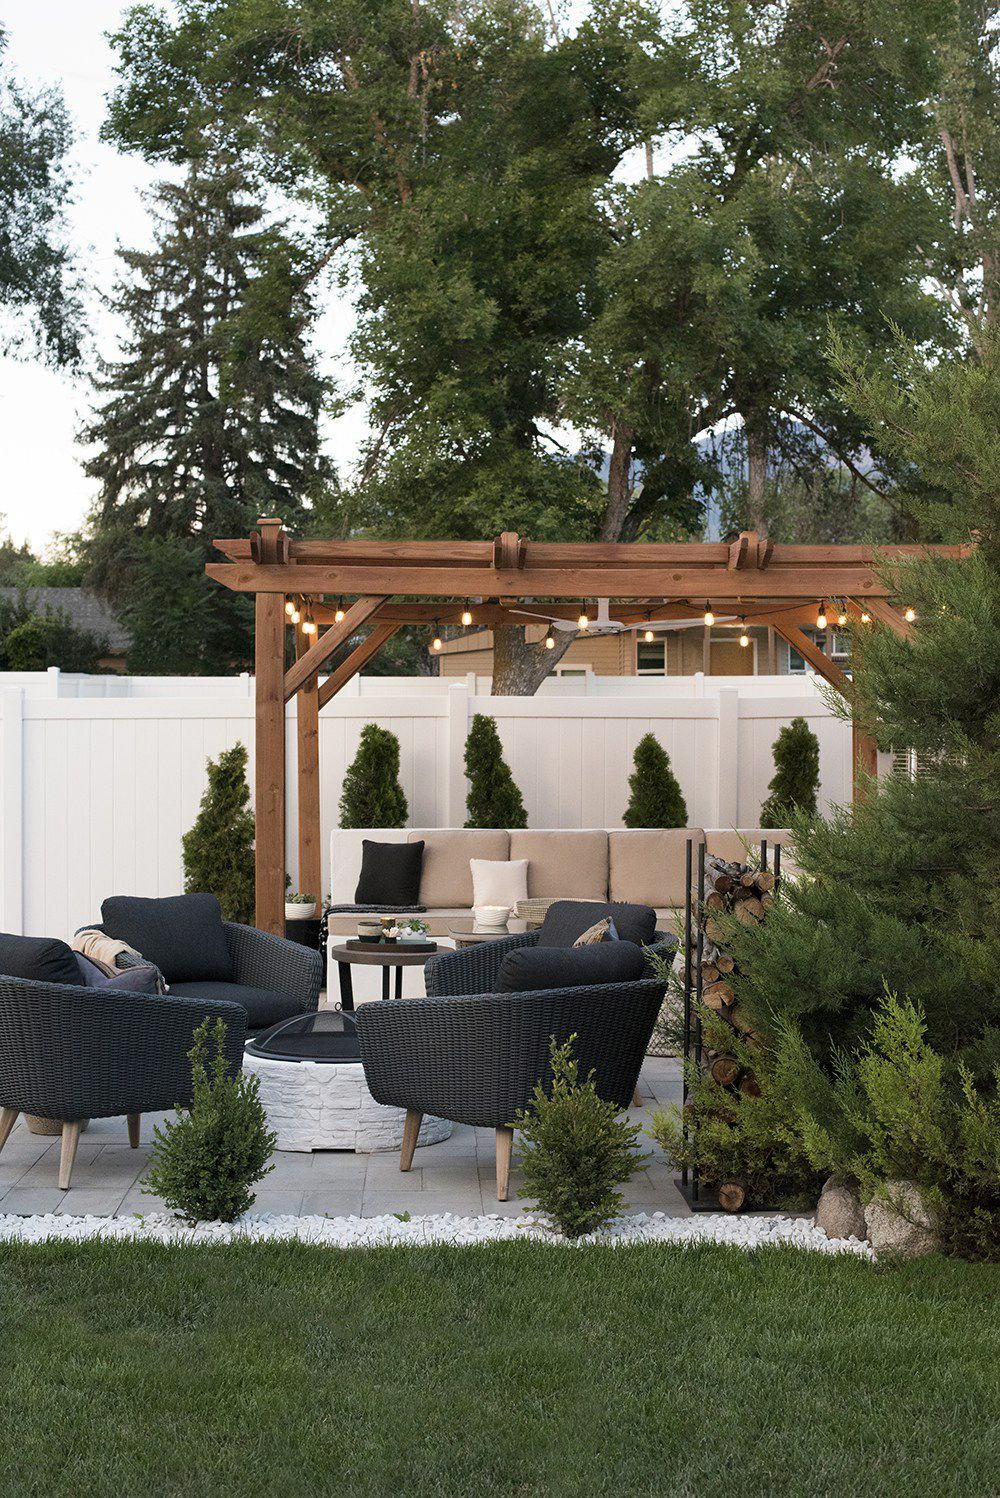 Simphome.com feature Some of best pergola ideas for the backyard how to use a pergola within backyard pergola ideas